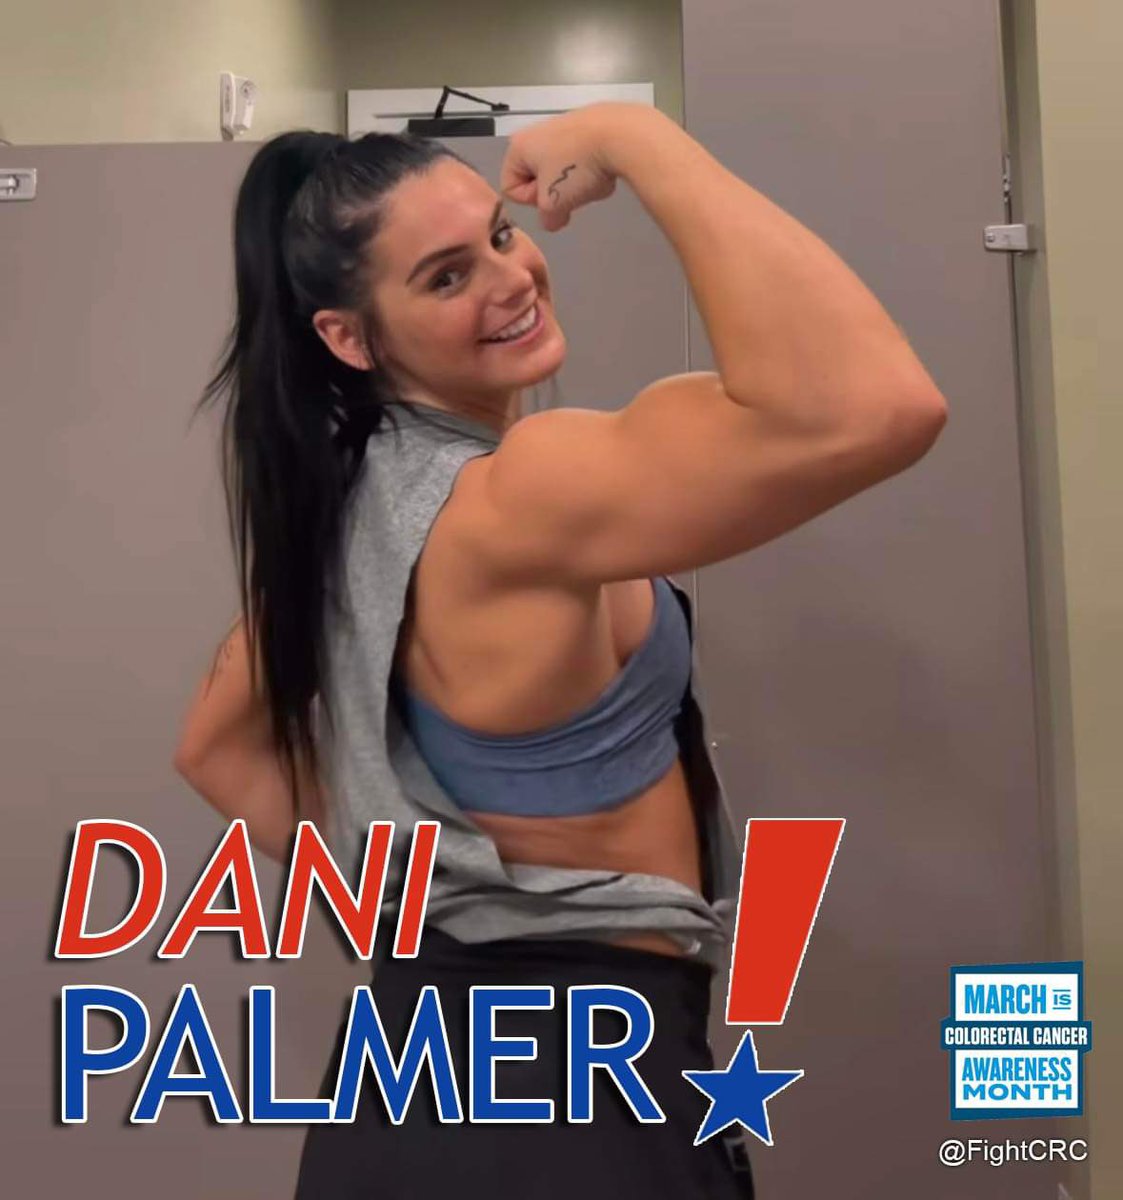 Thank you, @DaniPalmer_wwe, for taking a #StrongArmSelfie 💪🏻pic to support @fightcrc’s fight against #ColorectalCancer during #ColorectalCancerAwarenessMonth. Dani has joined the cause and is now part of the #RelentlessChampionsofHope. 💙🙏🏽#FightCRC #ColonCancer #MarchMadness